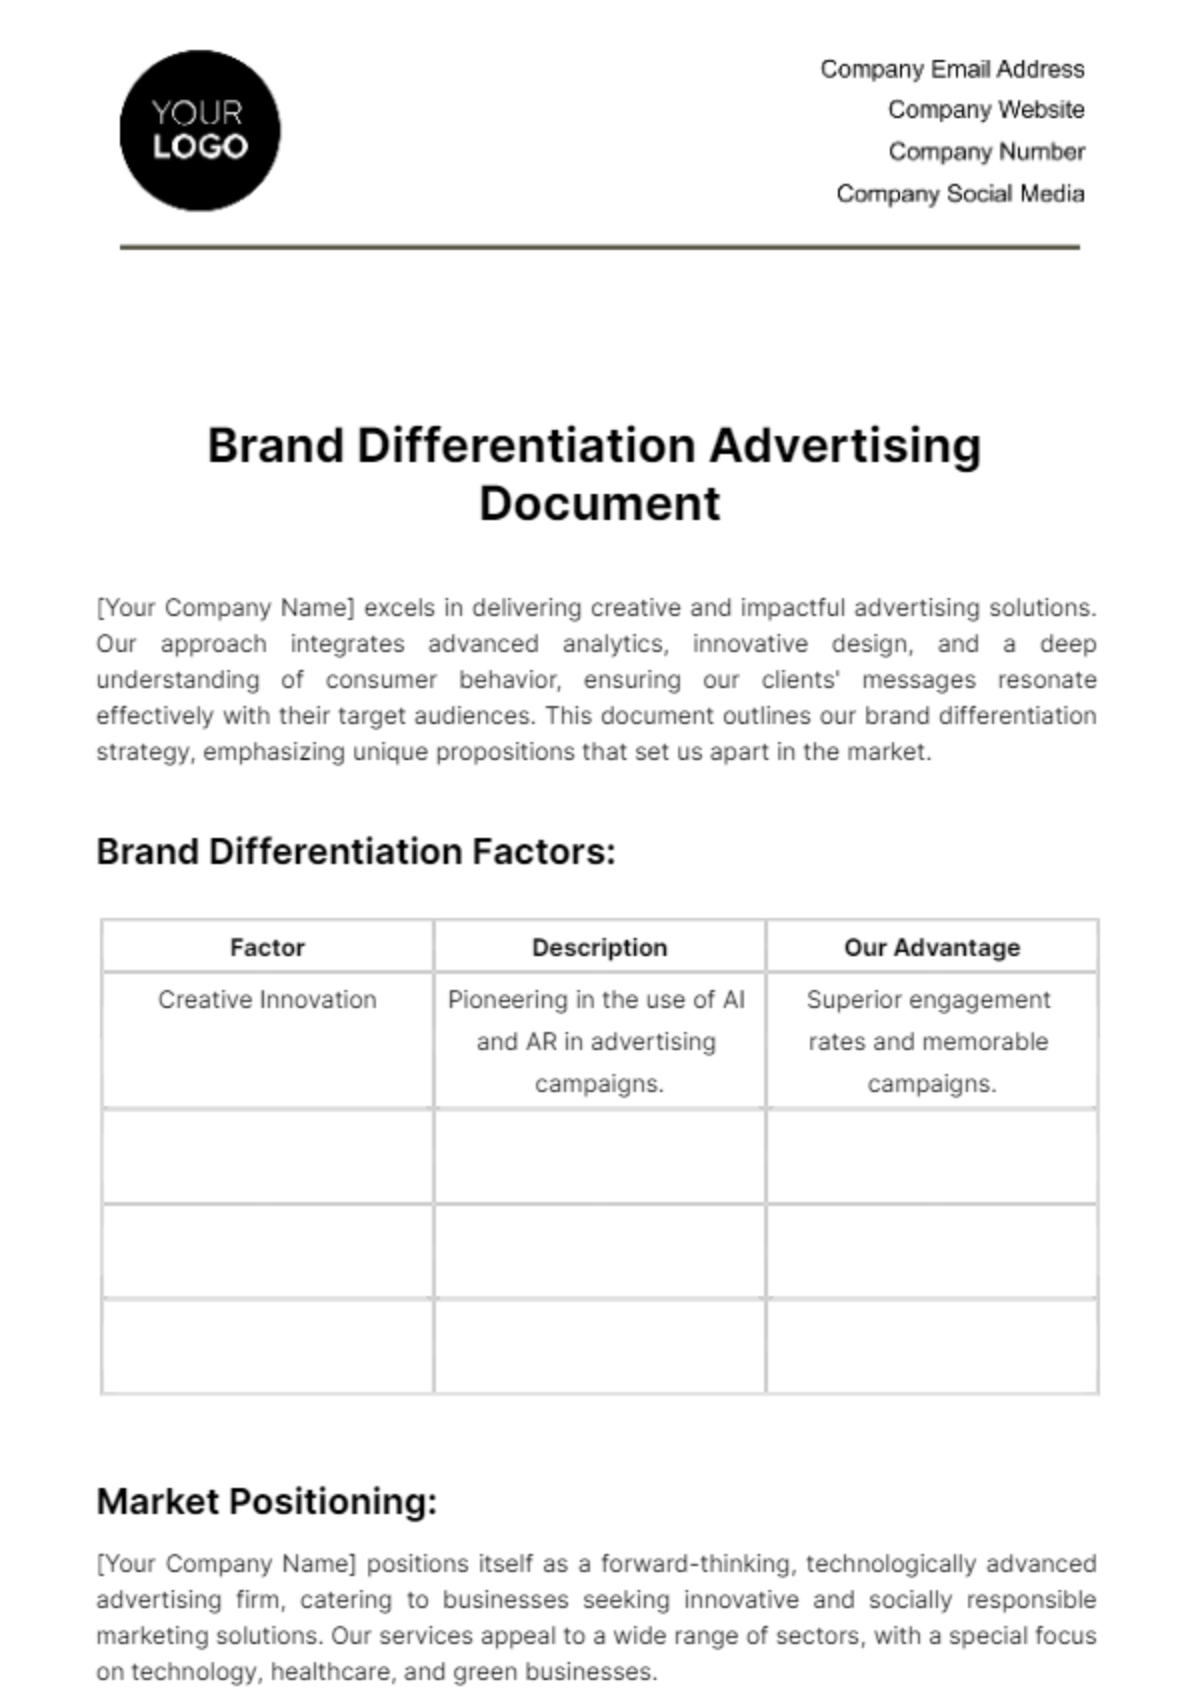 Brand Differentiation Advertising Document Template